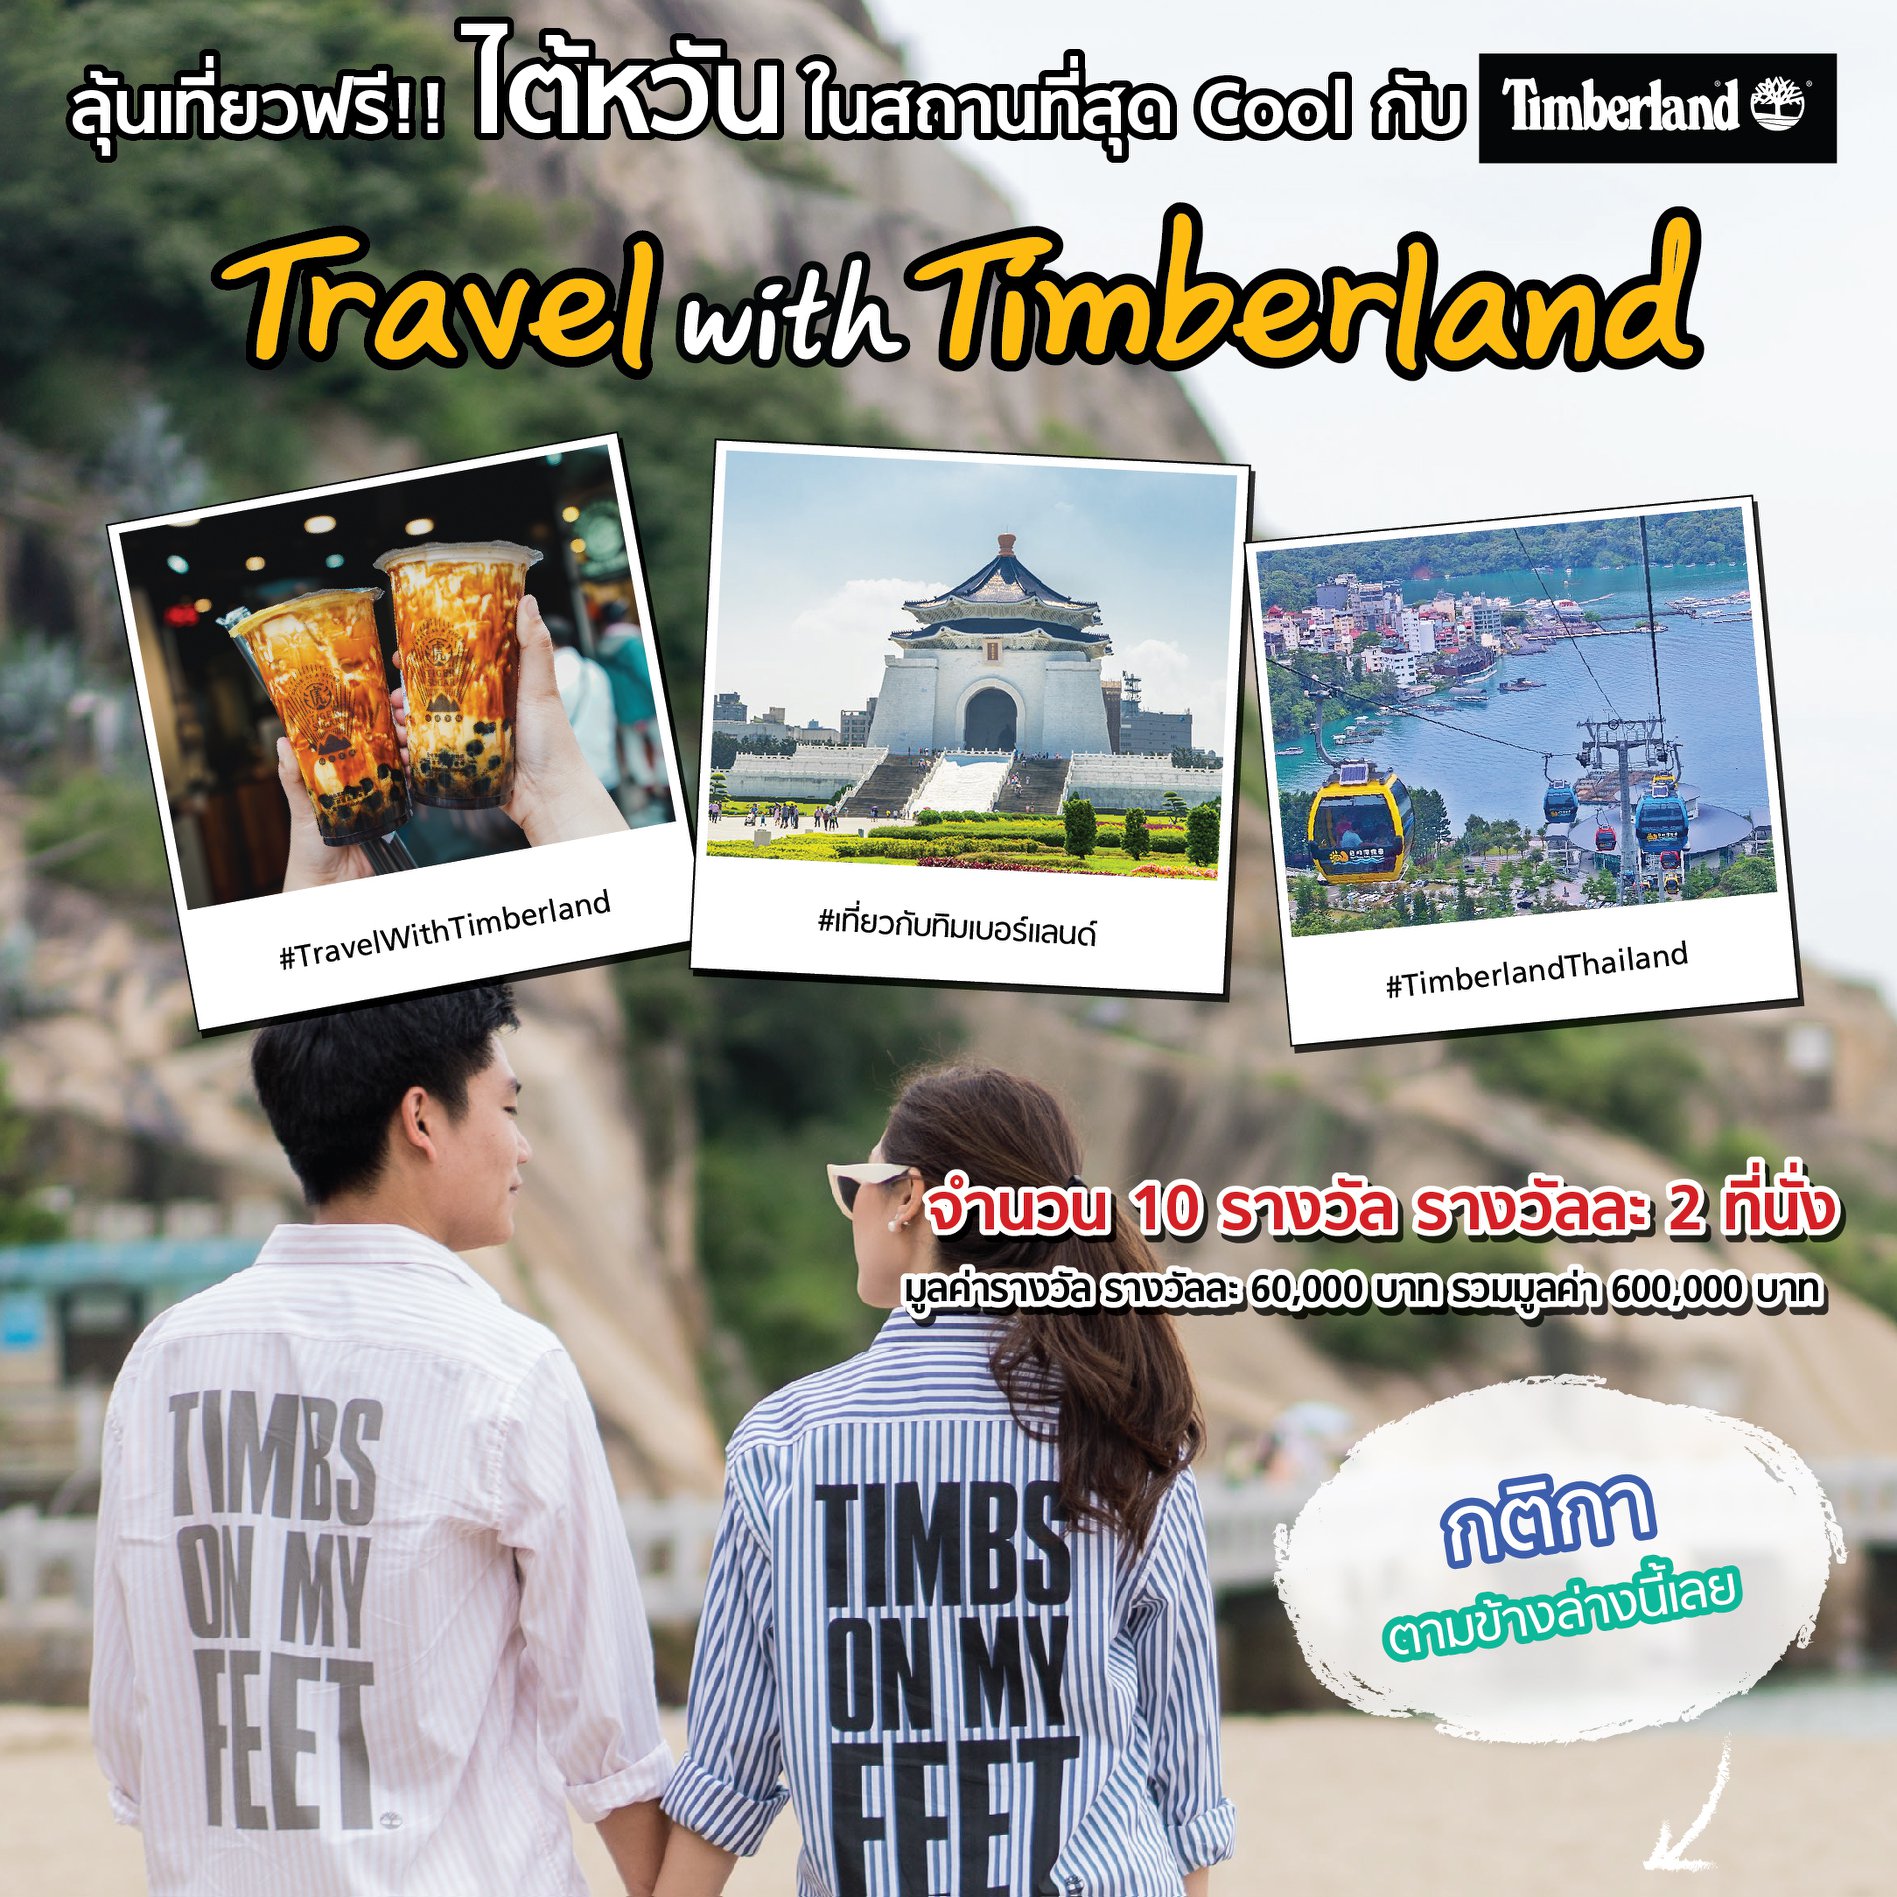 timberland free trip campaign